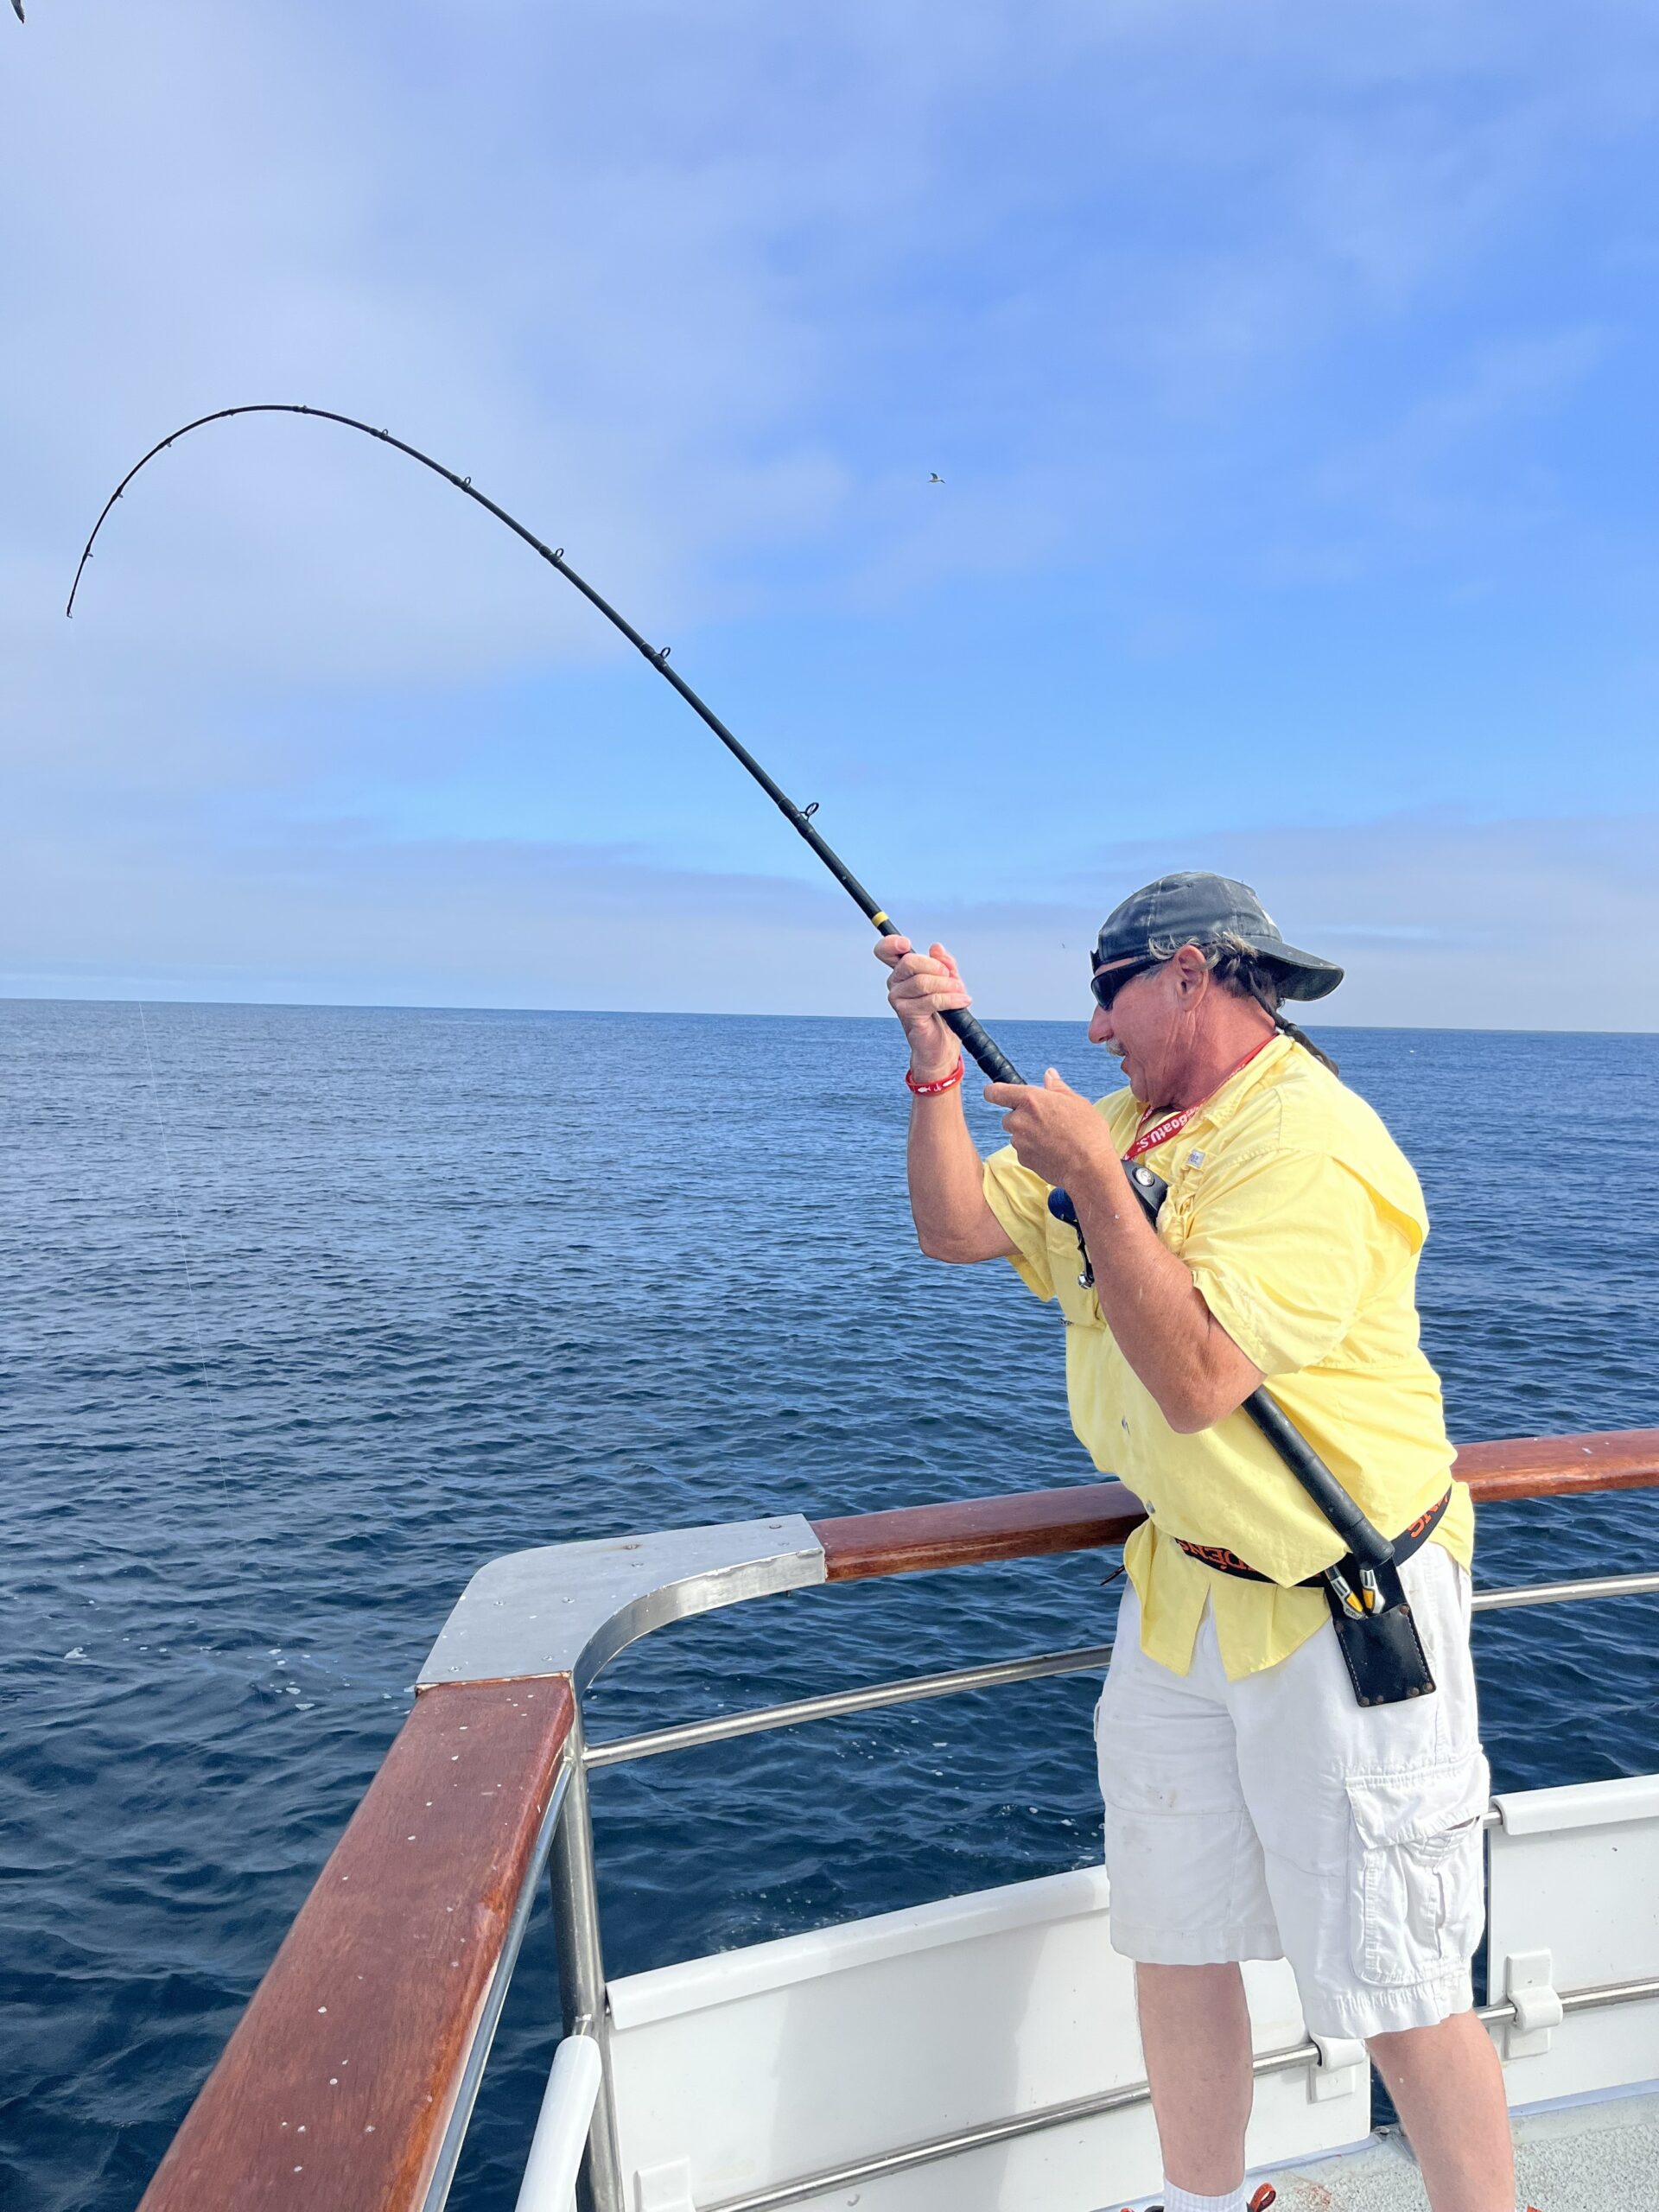 Great summer fishing at Catalina Island aboard the Gail Force